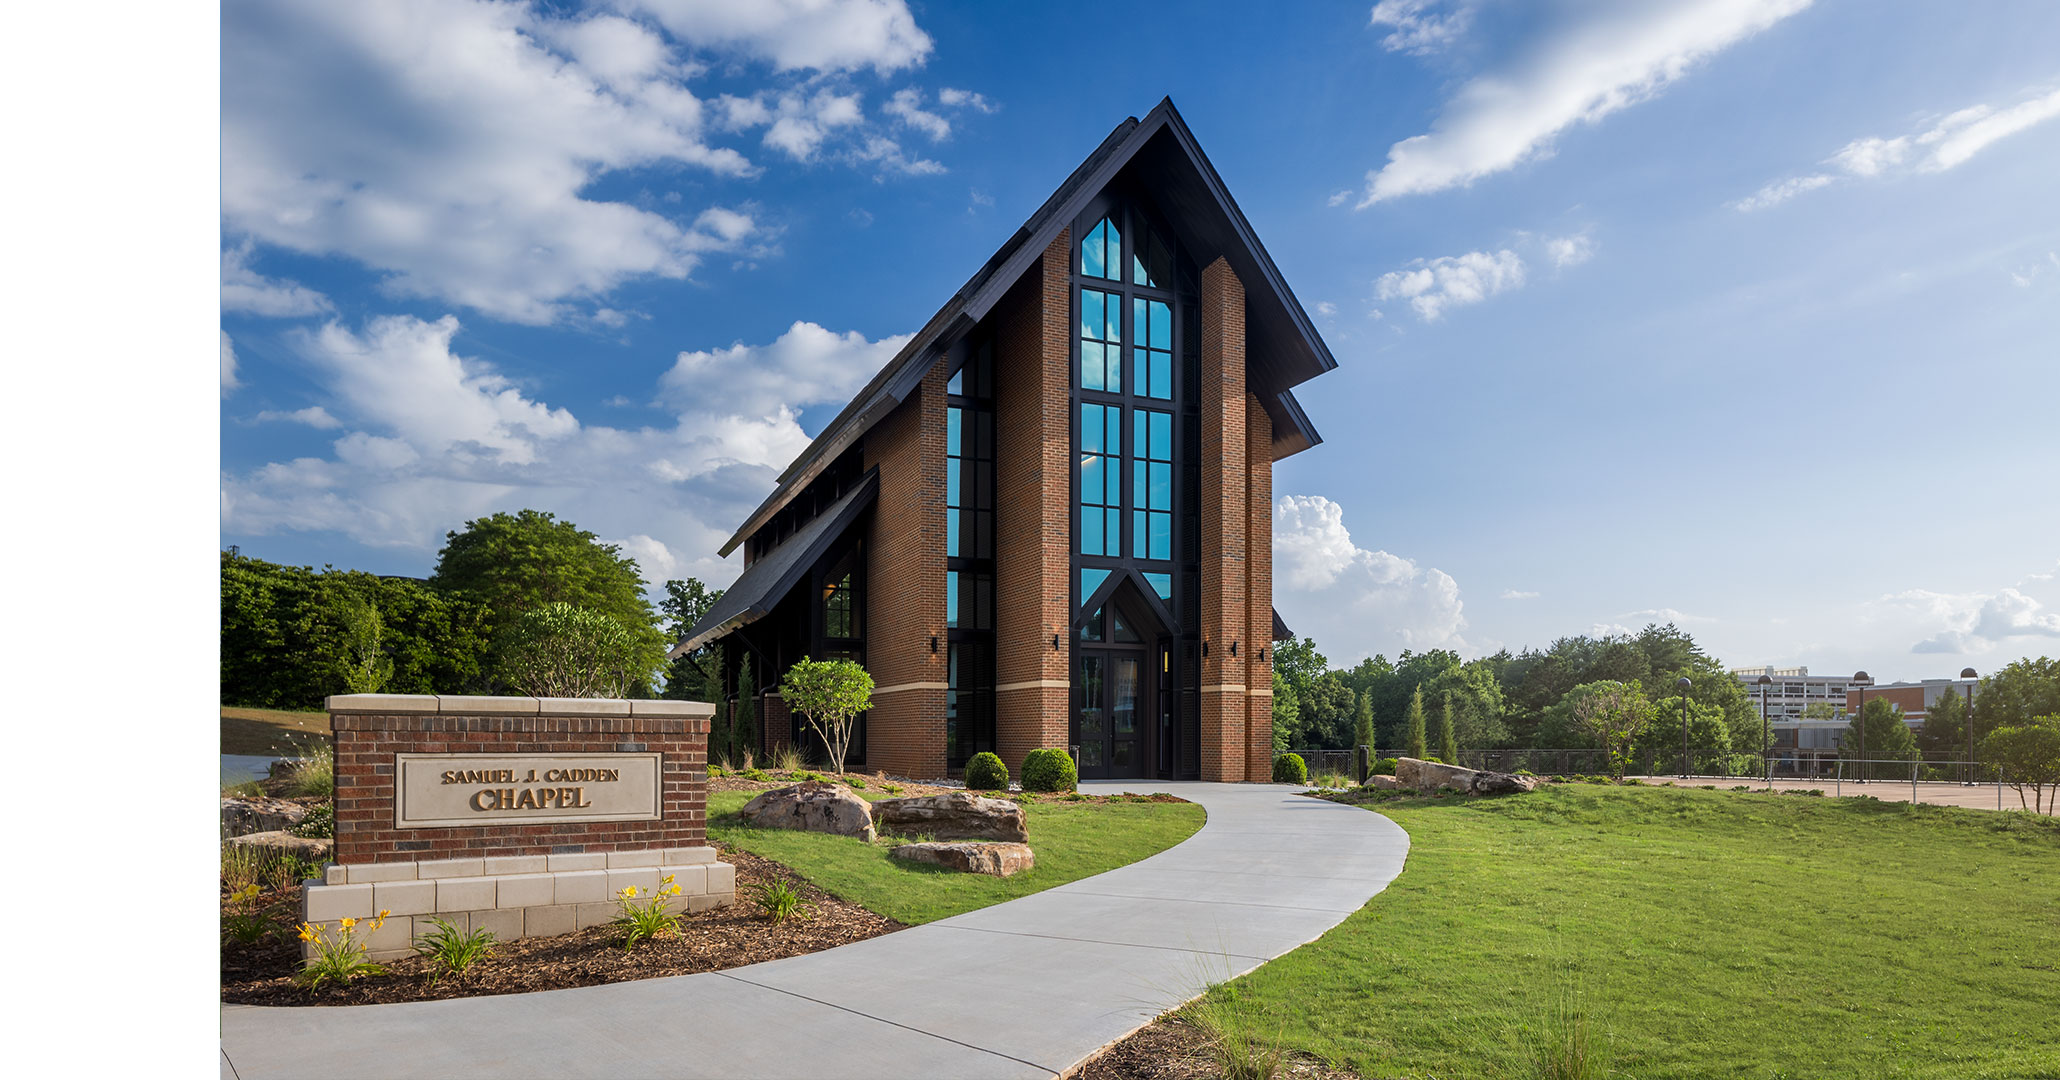 BOUDREAUX architecture is an expert designer of higher education campus spaces.